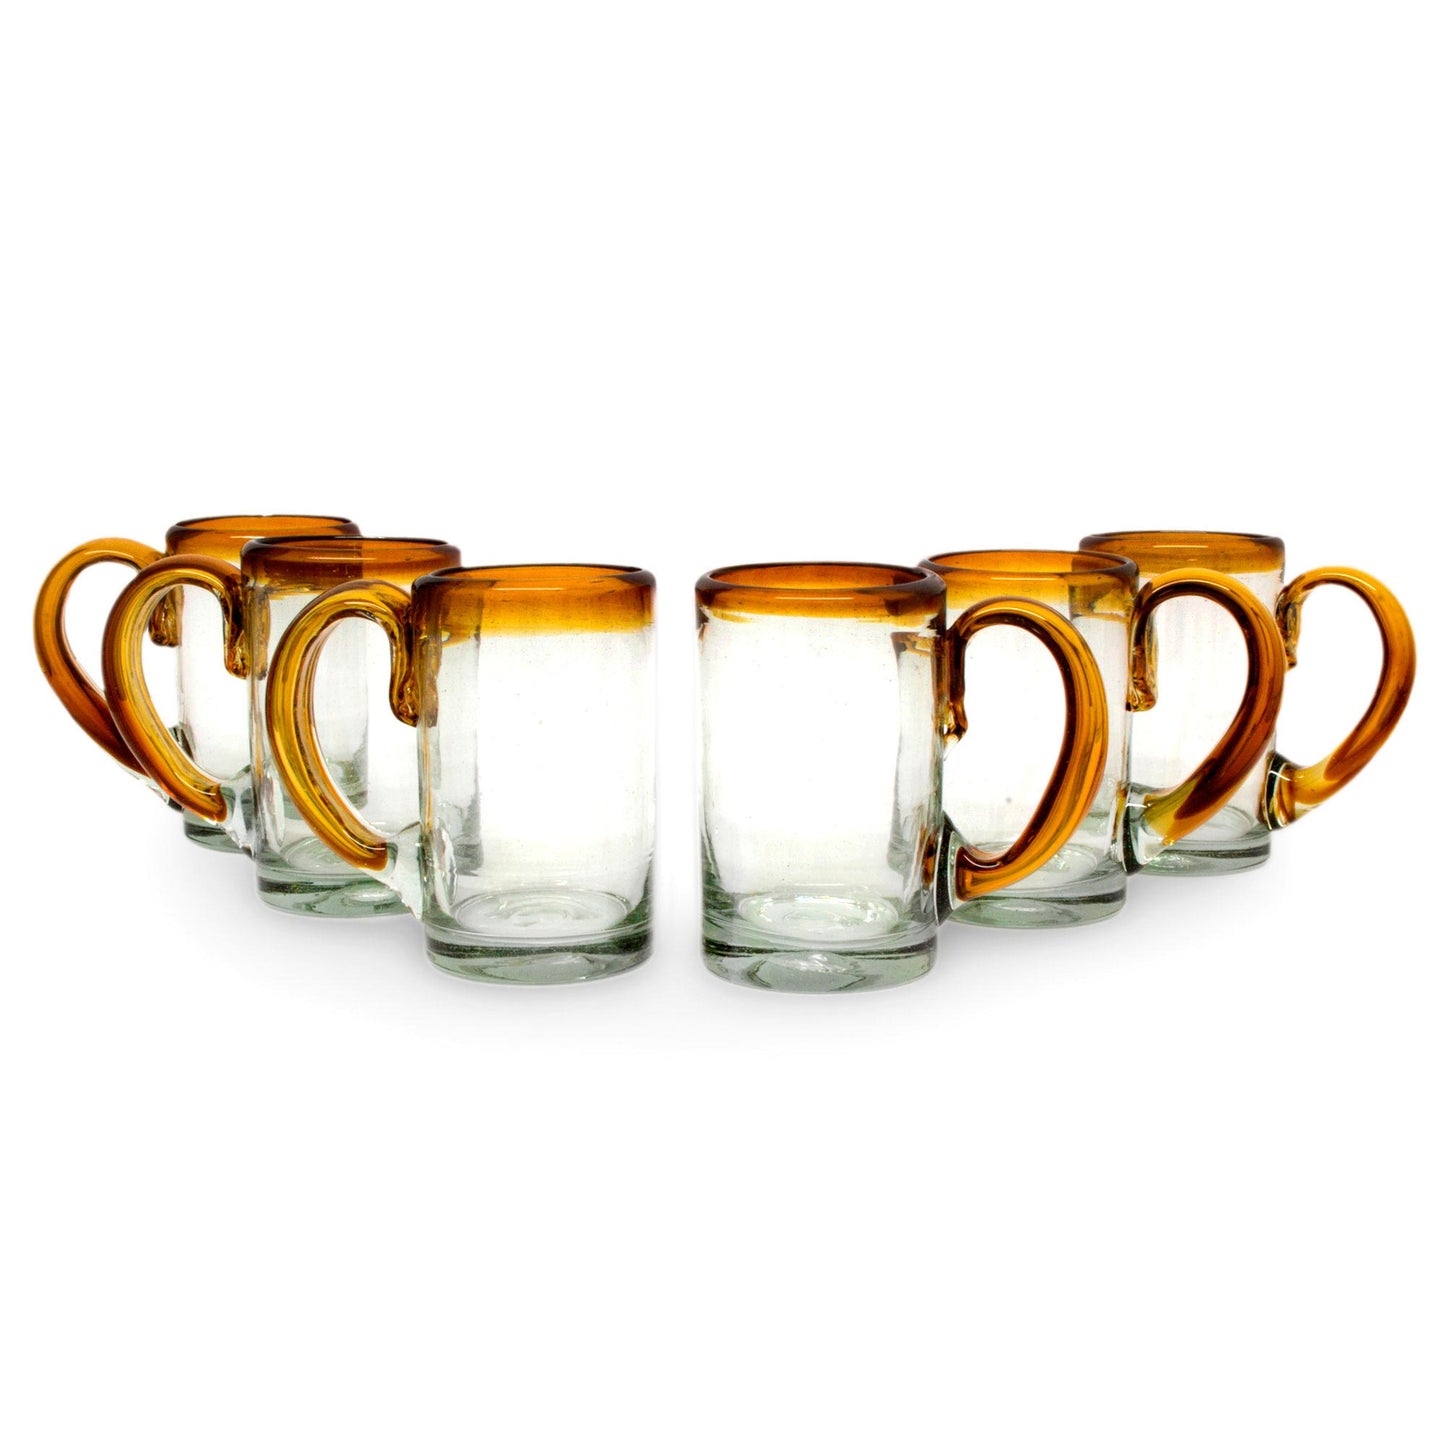 Amber Beer Hand Blown Beer Glasses with Amber Handle and Rim (Set of 6)